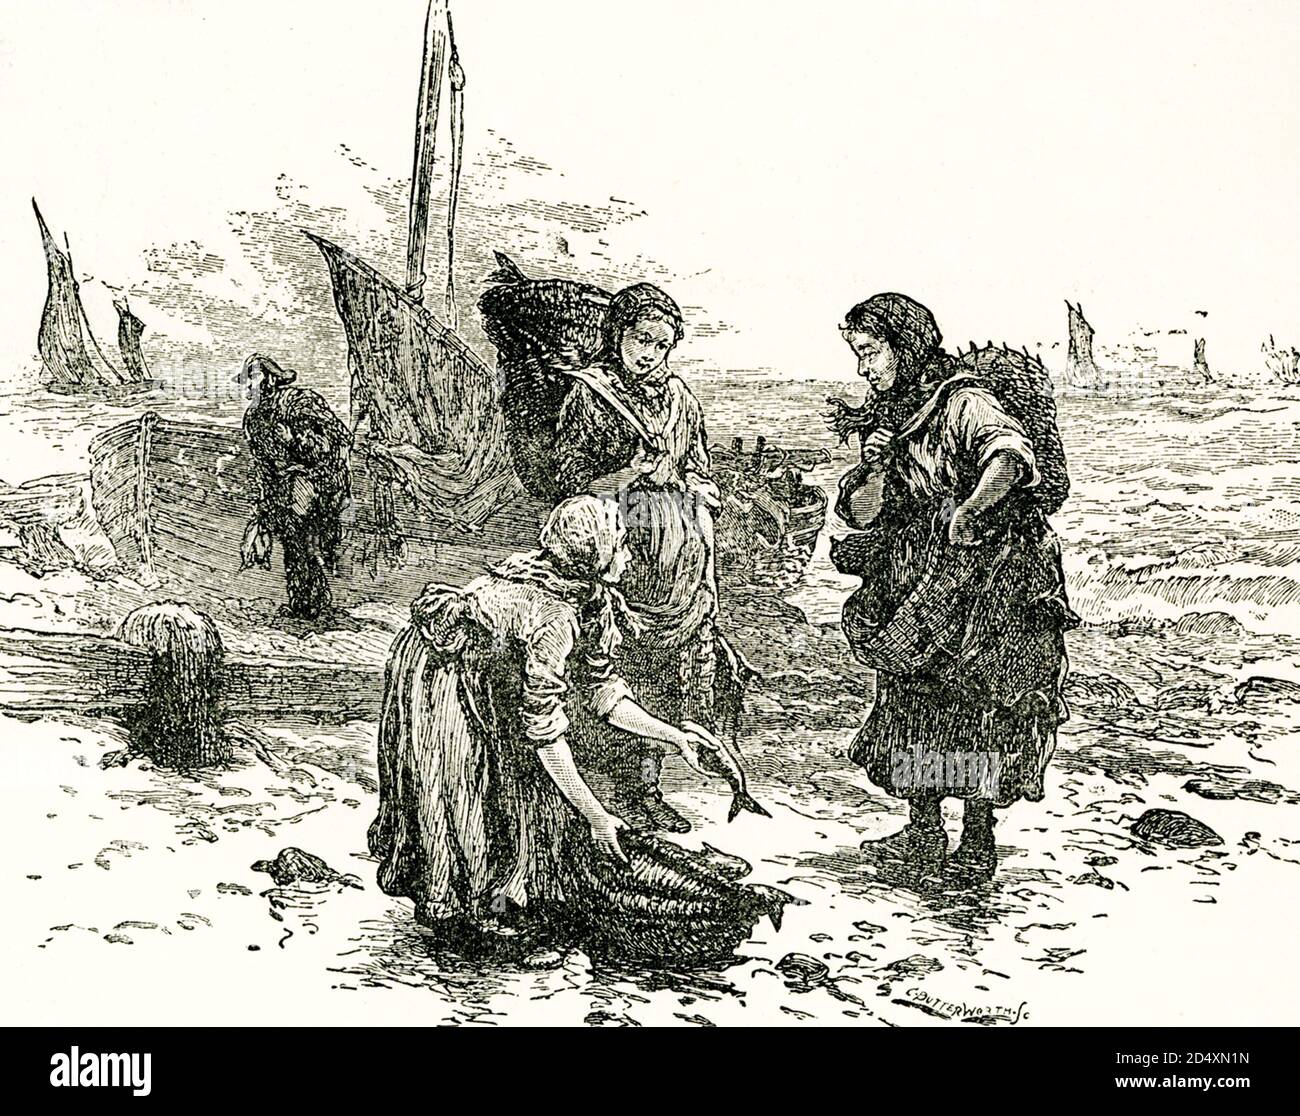 This late 1800s illustration shows Fisher Folk in Scotland. Fishermen, also known as fisher folk in Scotland, have been casting their lines off the coast of the north east of the country since before Viking longship keels scraped the shingle beaches and the Danes set foot ashore around about 794 AD.  Communities of fisher folk have lived and worked for many generations in isolation of a larger world yet bound together in commonality of a hazardous, unpredictable occupation. Stock Photo